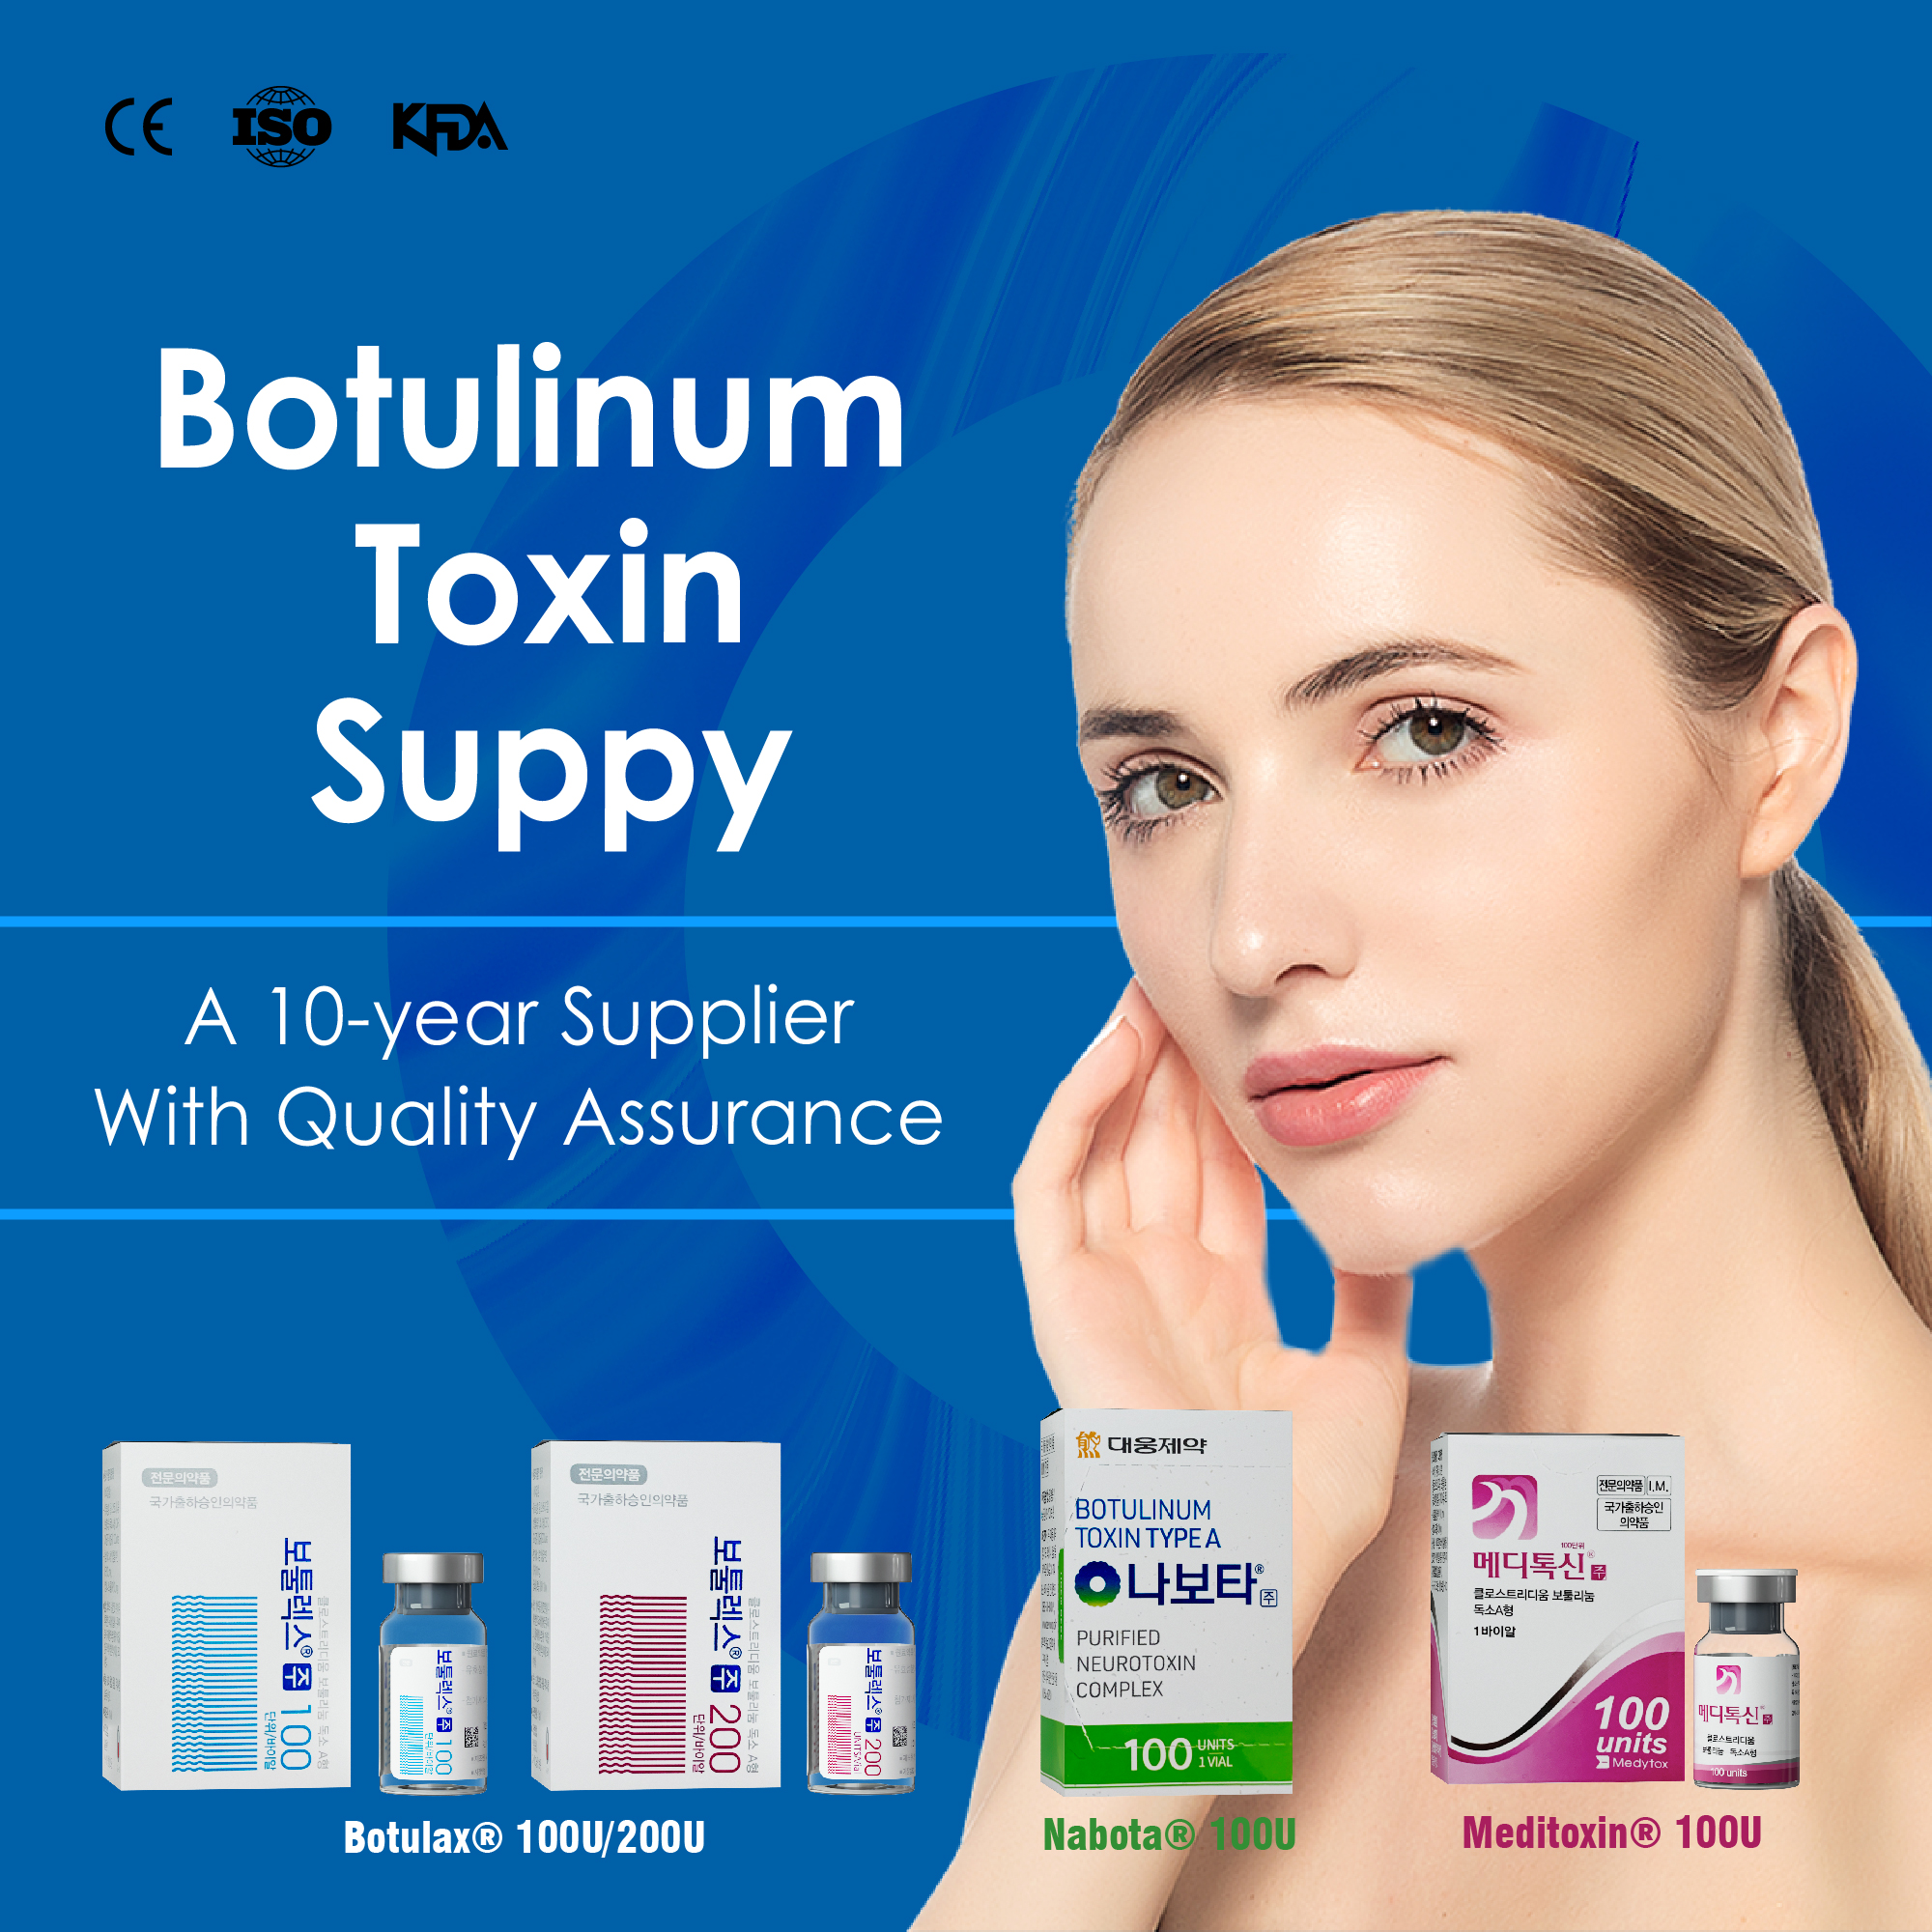 How Much Does A Vial of Botulinum Toxin Cost WholesaleBotulinum Toxin 